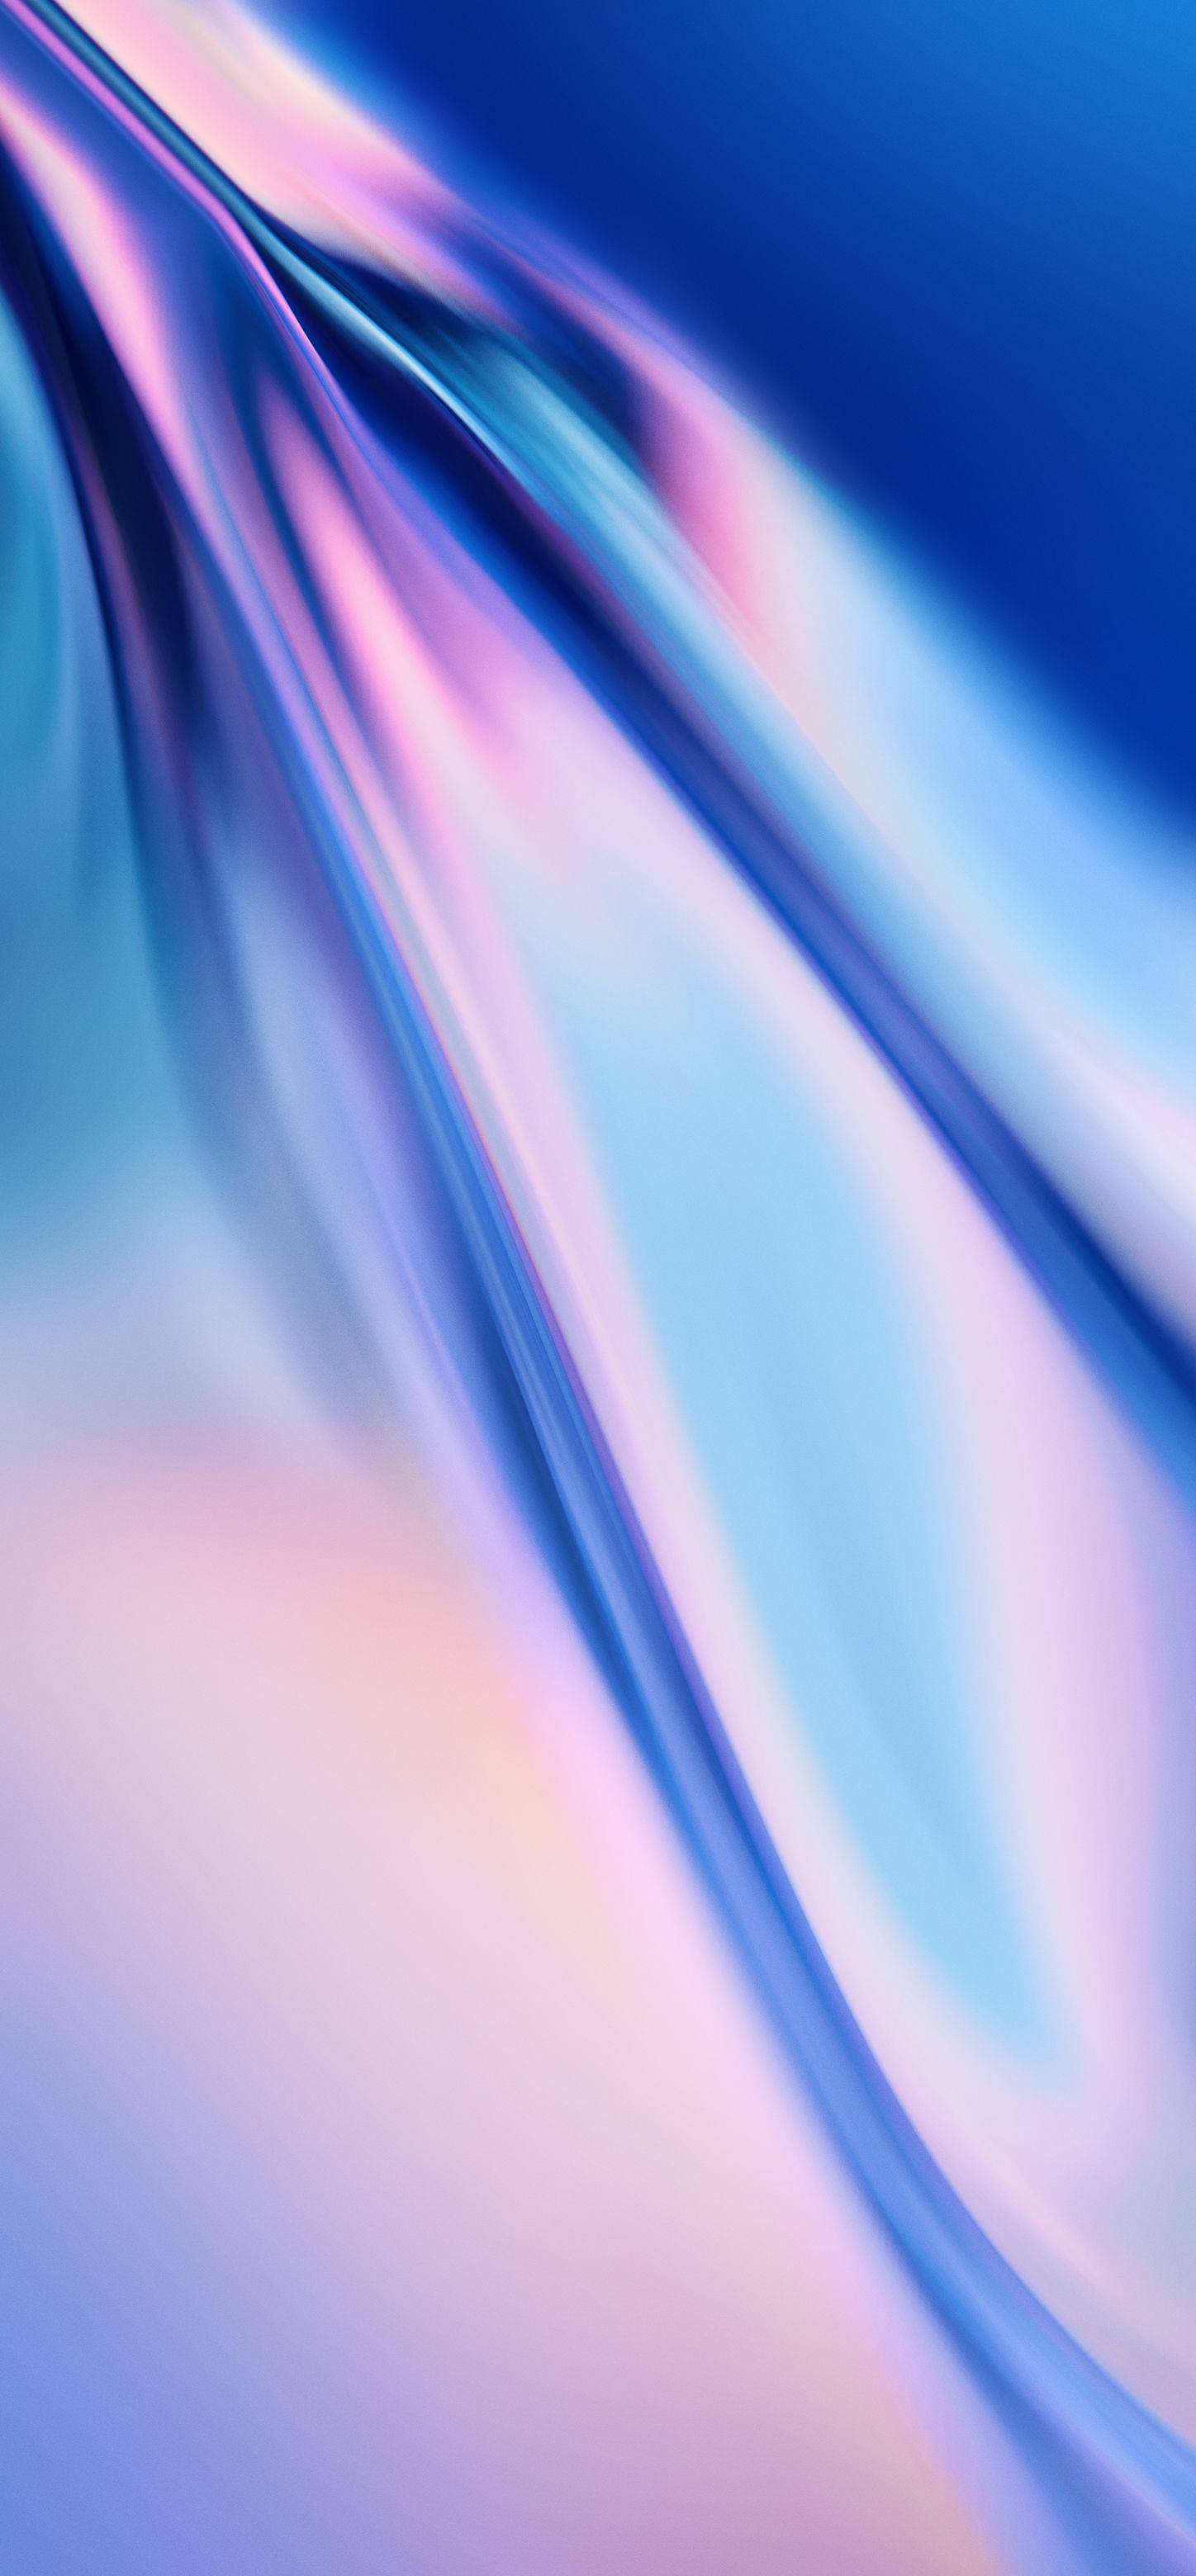 Glowing Oneplus 8 Pro Device Background